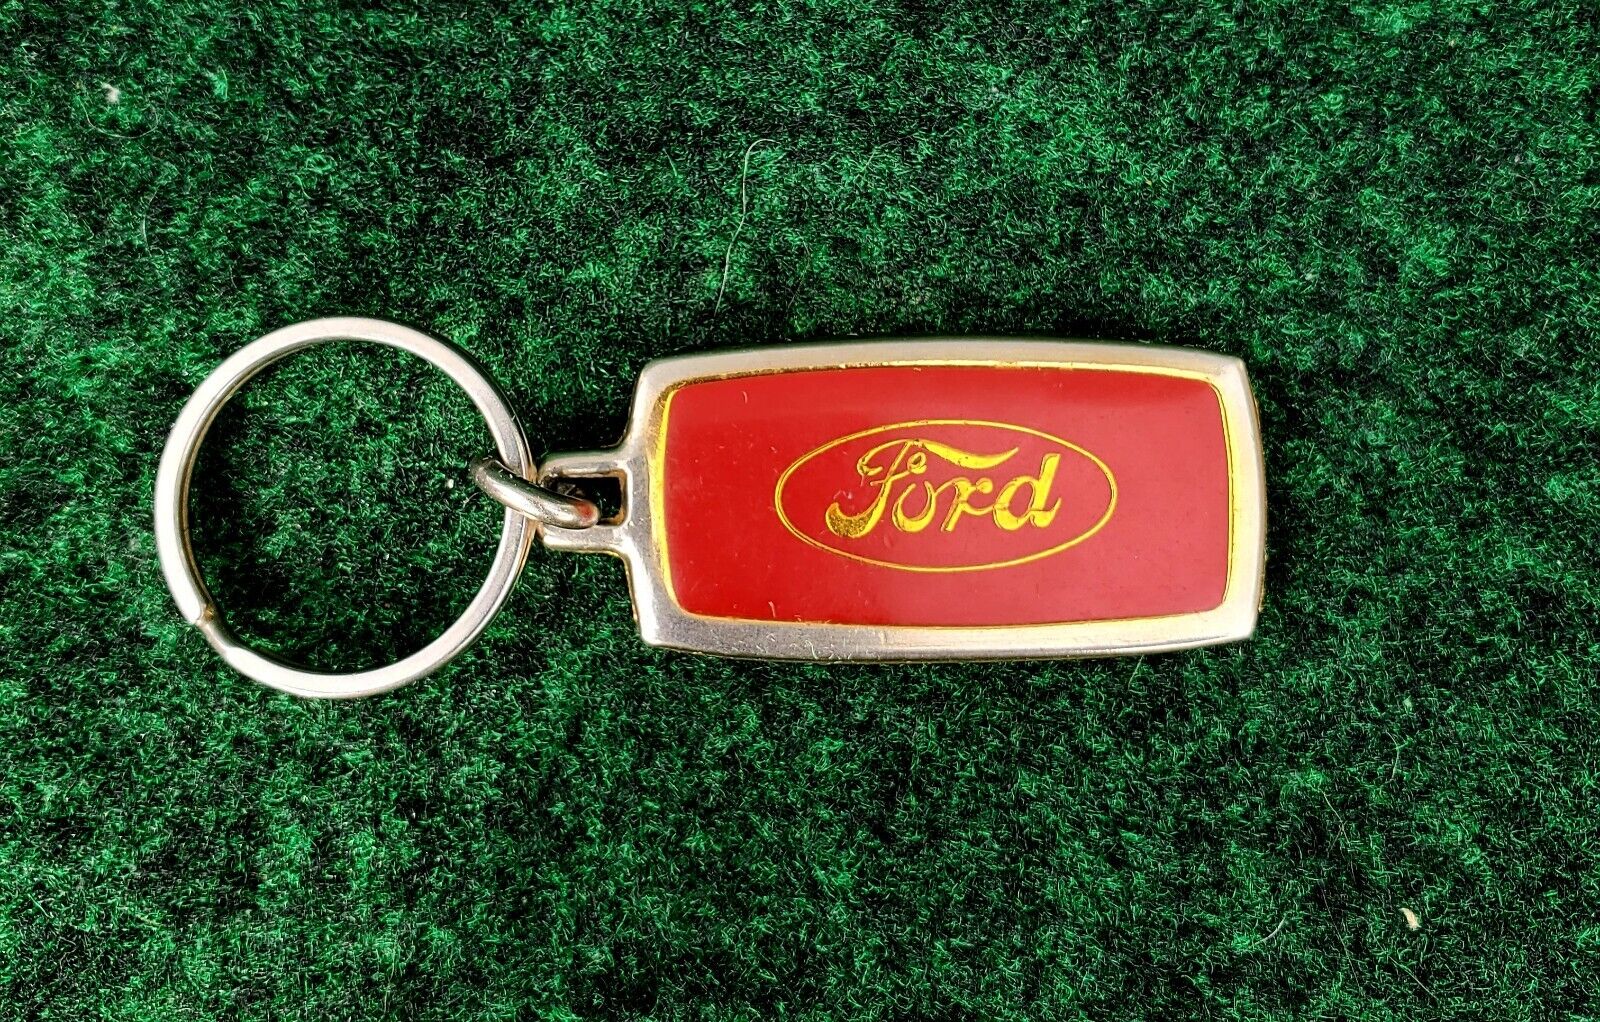 VTG Karriers Ford Keychain 1970's USA  